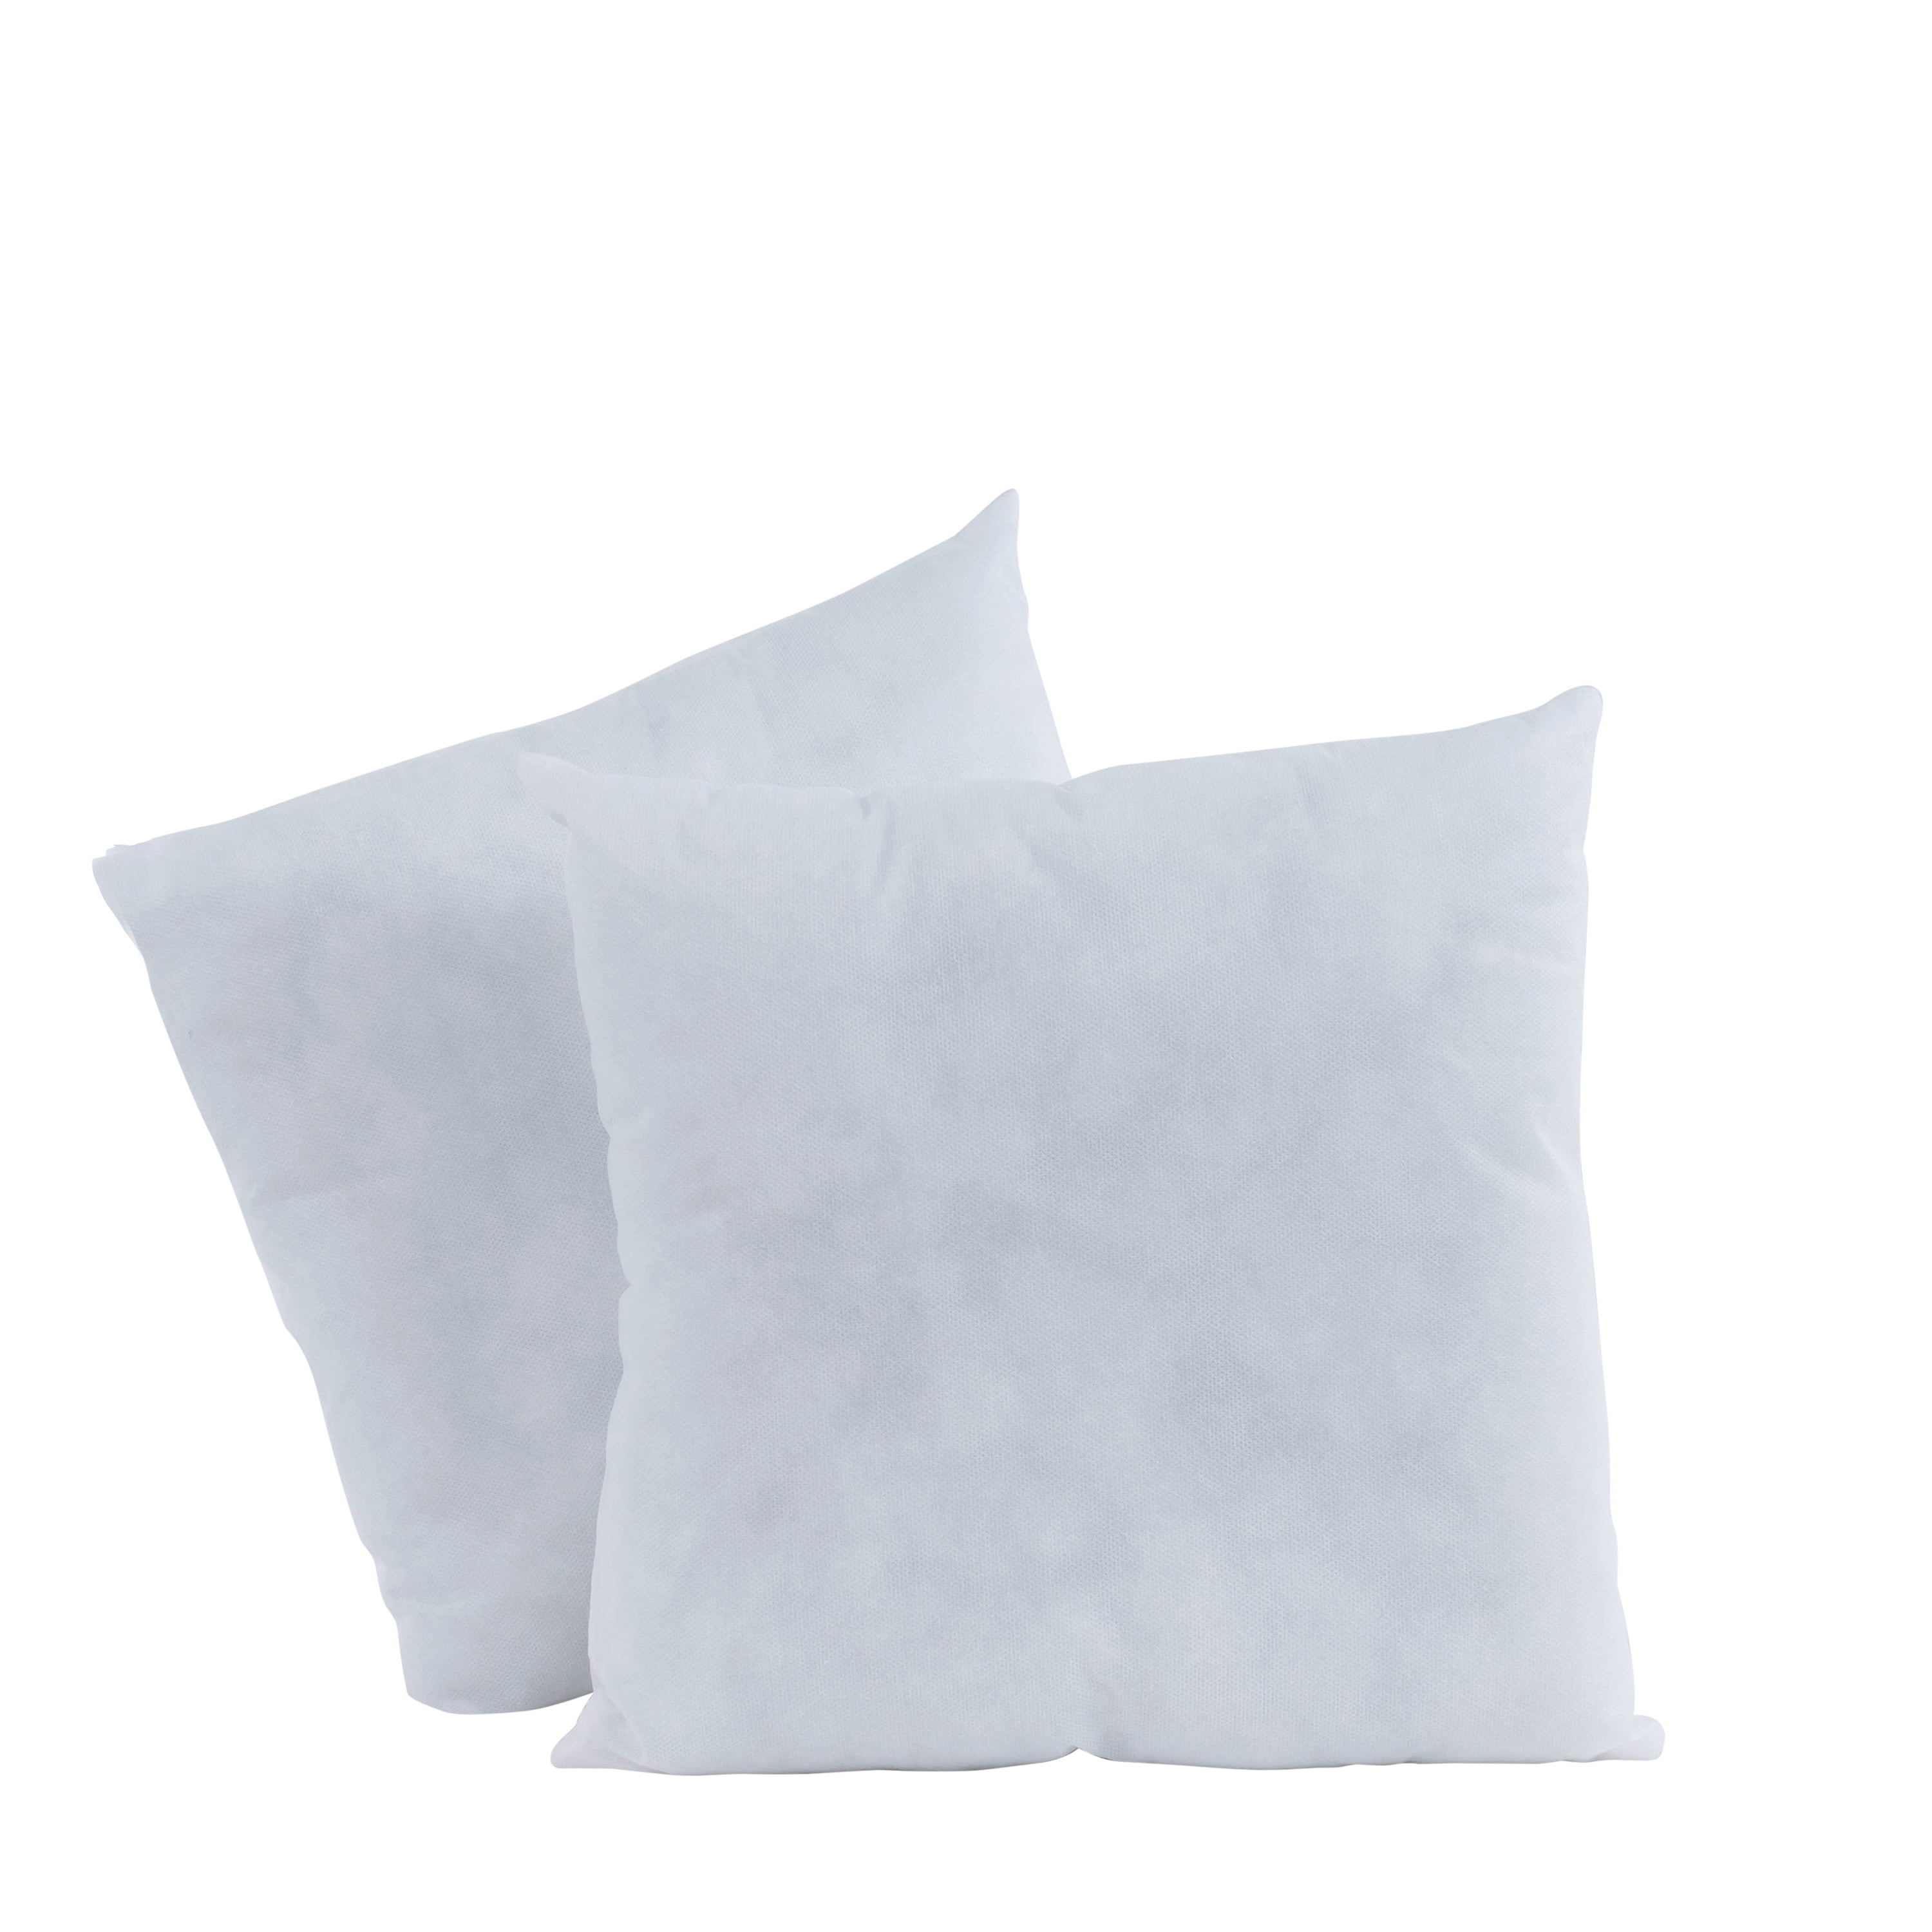 TSUTOMI 16x16 Pillow Insert Set of 2 for Pillow Stuffing, Decorative  Pillows for Bed, 16x16 Pillow Fillers and Down Lumbar Pillow Insert, Square  Small